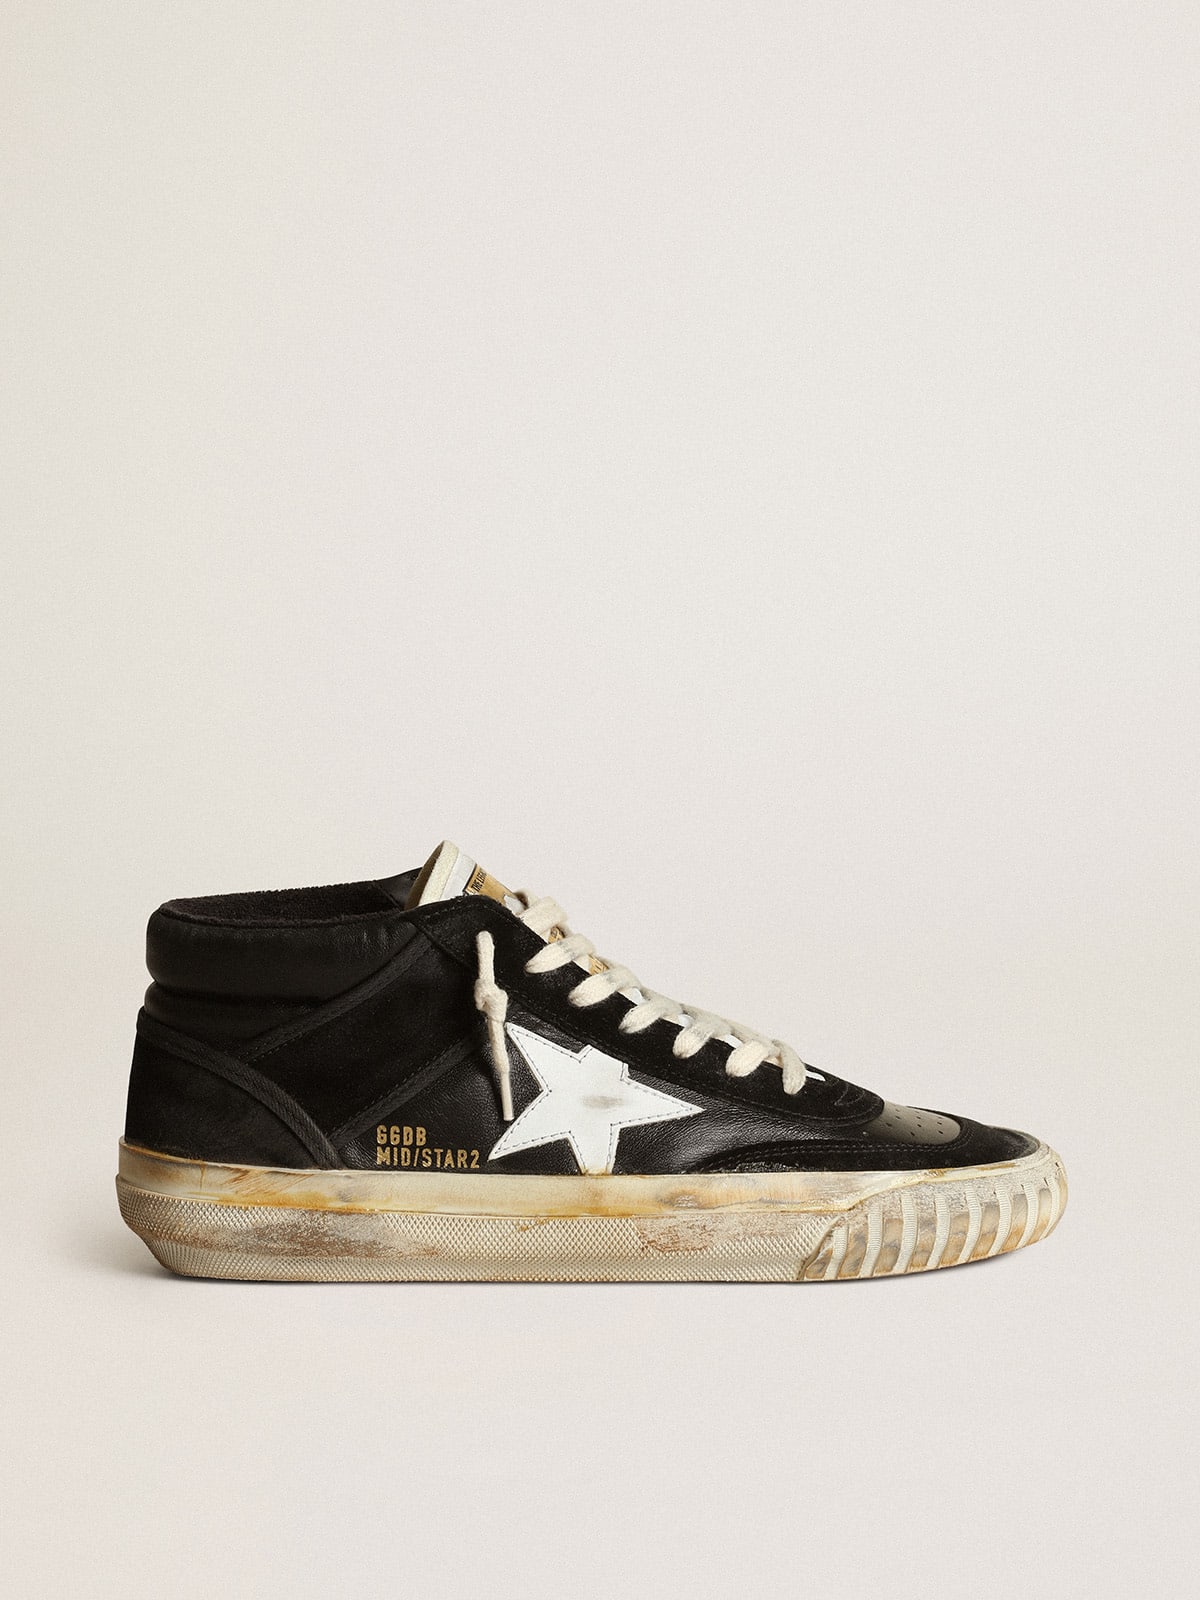 Women's Mid Star in black nappa and suede with white leather star